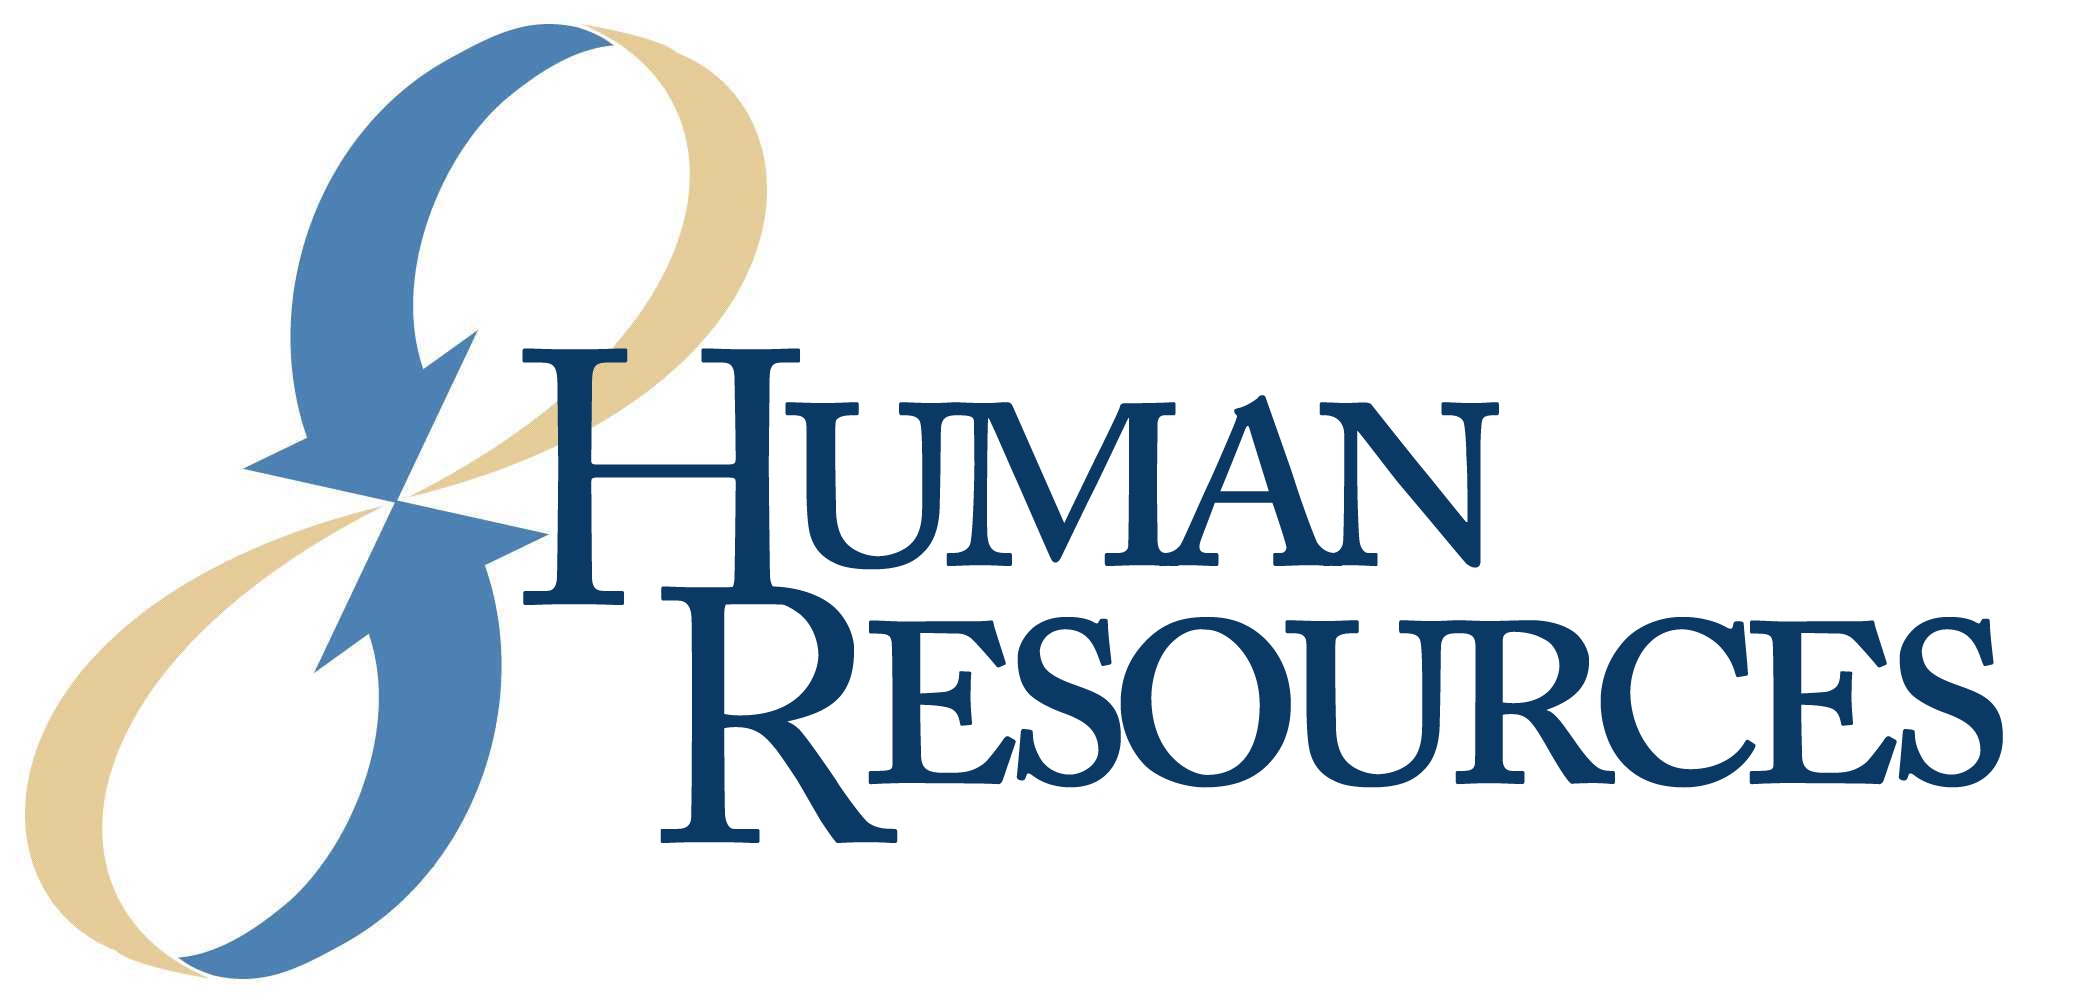 Is Human Resources Links